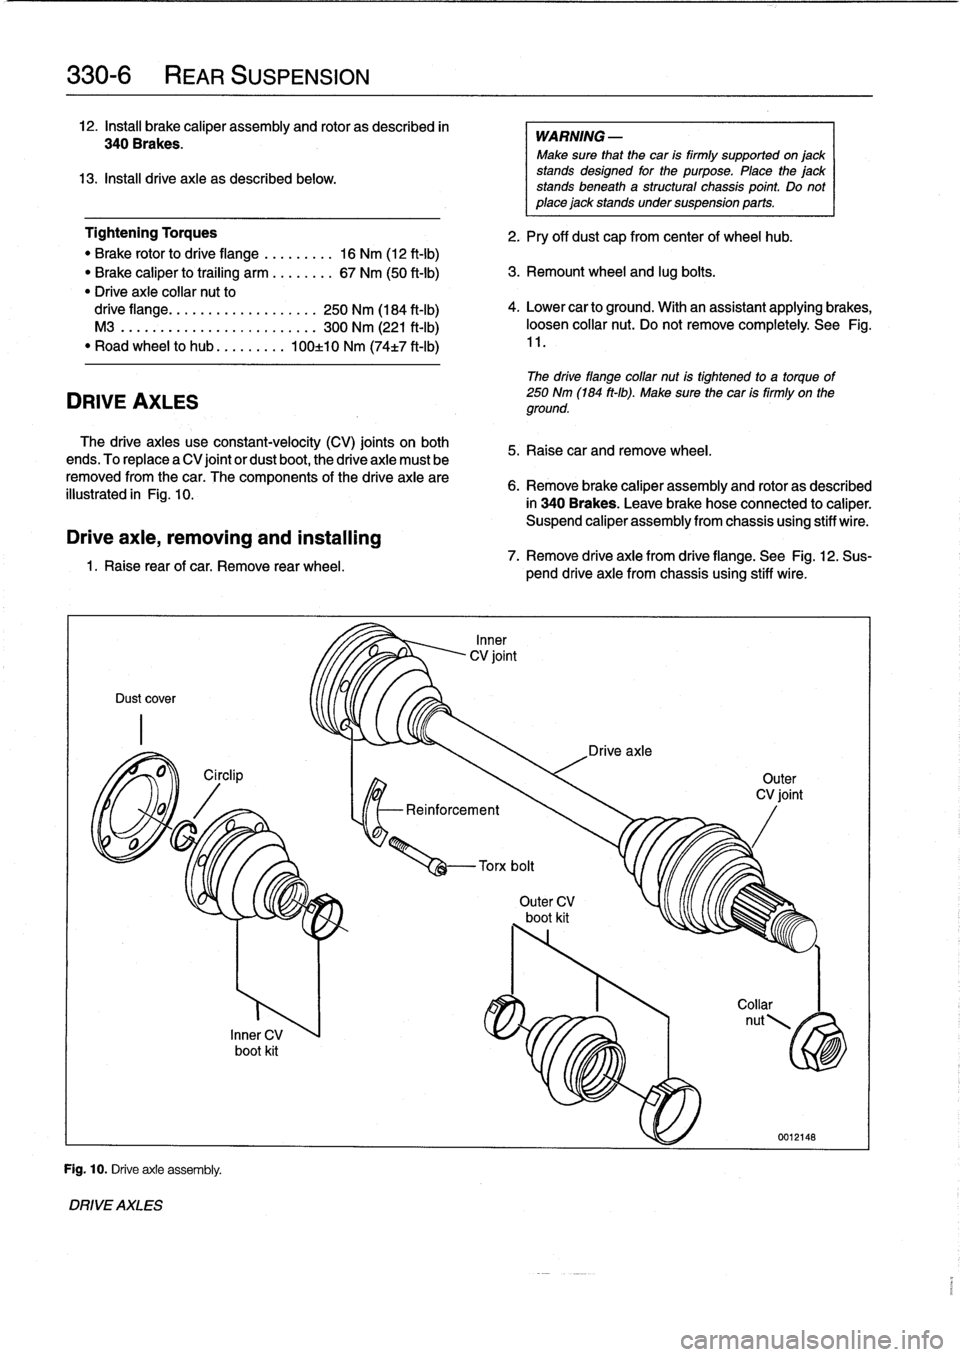 BMW 323i 1993 E36 Owners Manual 
330-
6

	

REAR
SUSPENSION

12
.
Install
brake
caliper
assembly
and
rotor
as
described
in

340Brakes
.

13
.
Install
drive
axie
as
described
below
.

Tightening
Torques

"
Brake
rotor
to
drive
flange